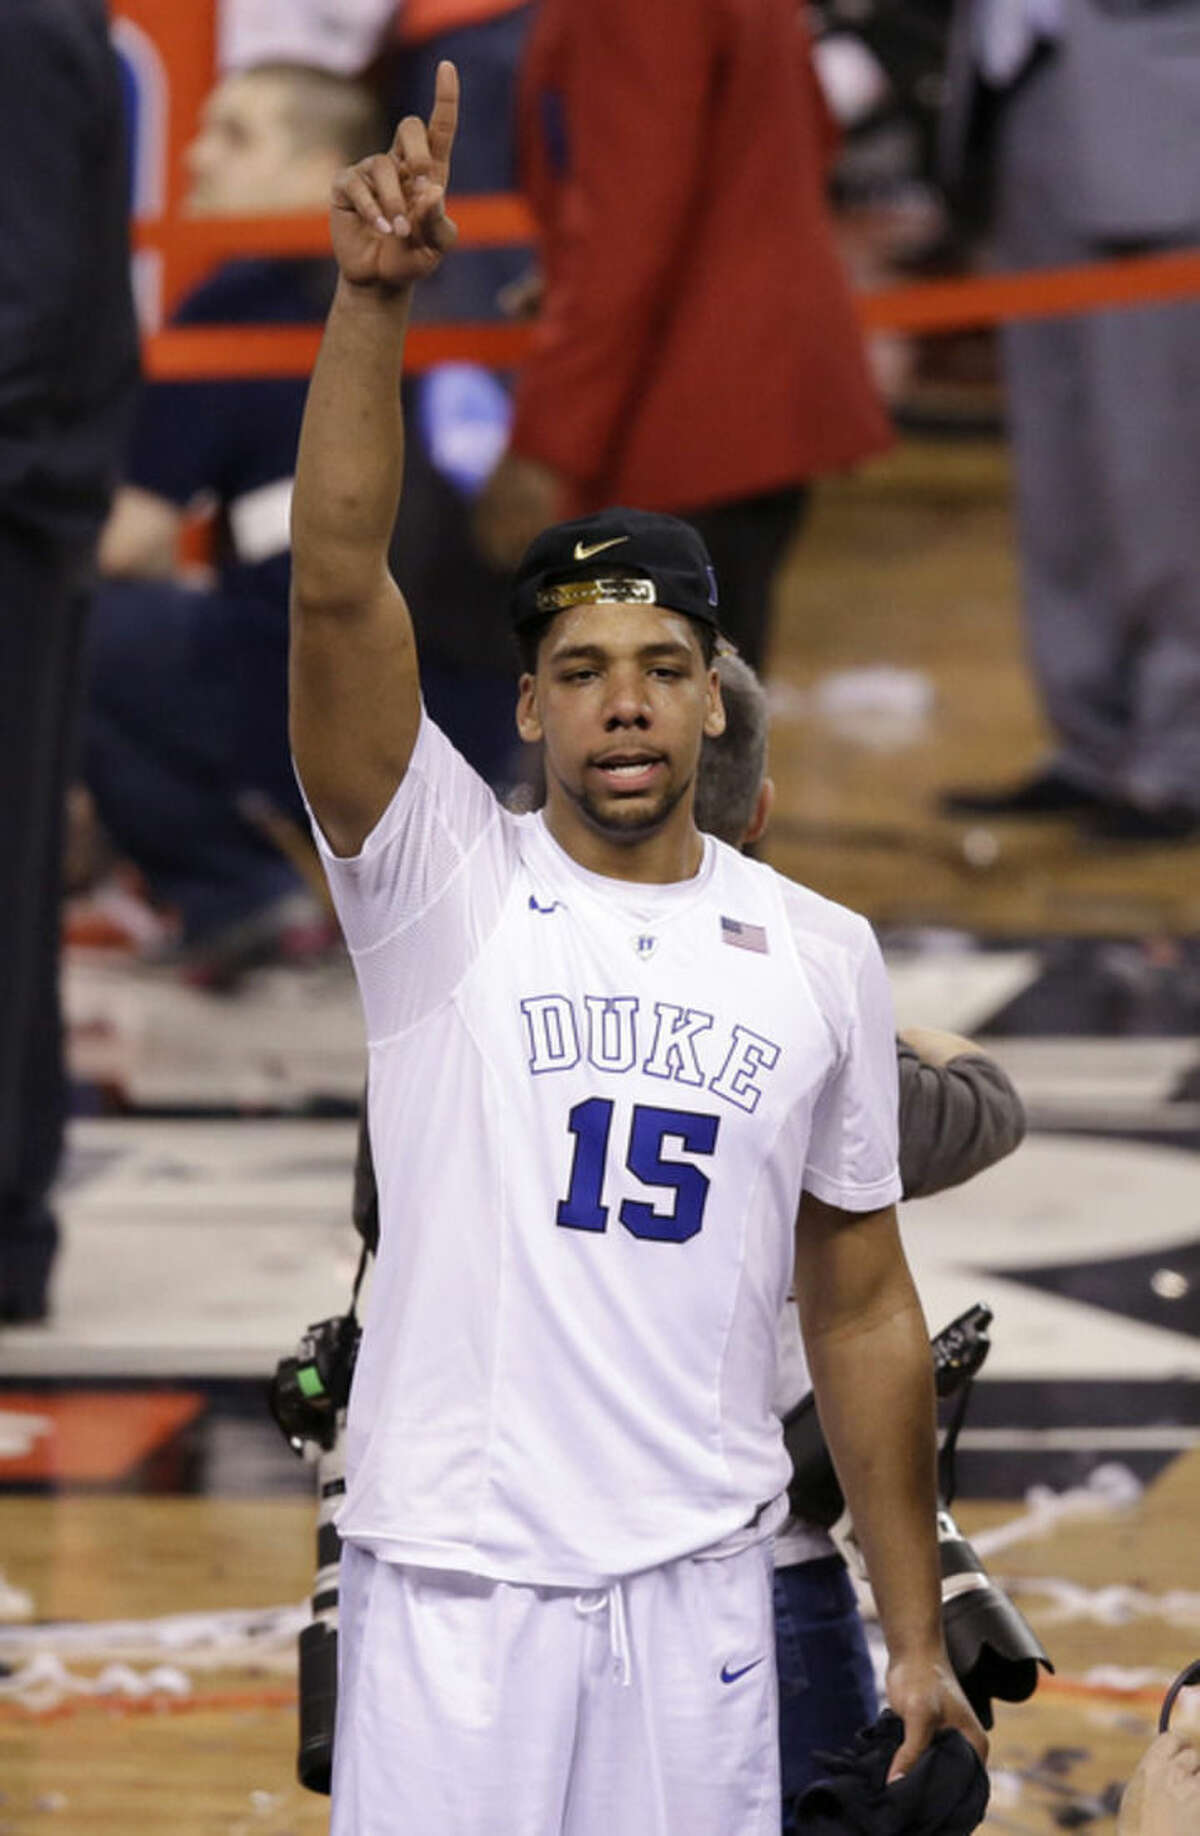 Duke's Jahlil Okafor celebrates after his team's 68-63 victory over Wisconsin in the NCAA Final Four college basketball tournament championship game Monday, April 6, 2015, in Indianapolis. (AP Photo/Darron Cummings)